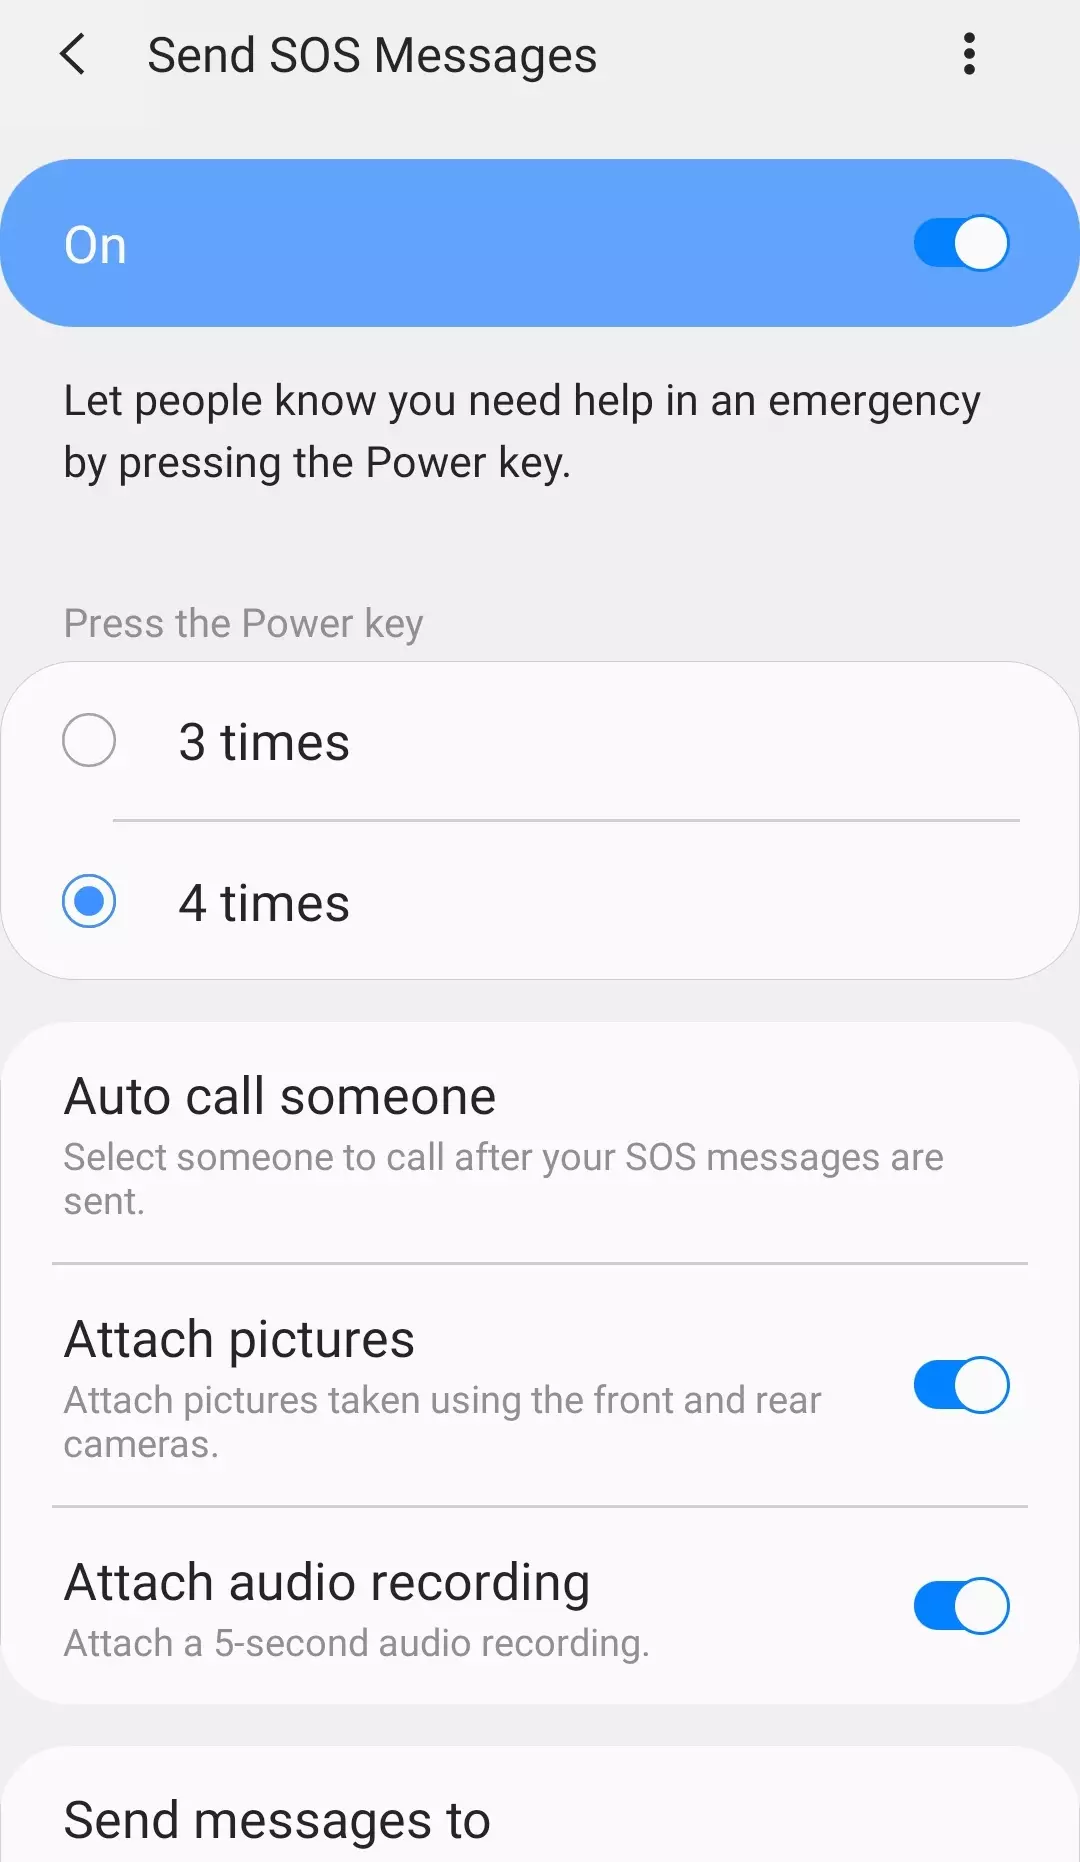 Android also has an Emergency SOS feature that can be activated (